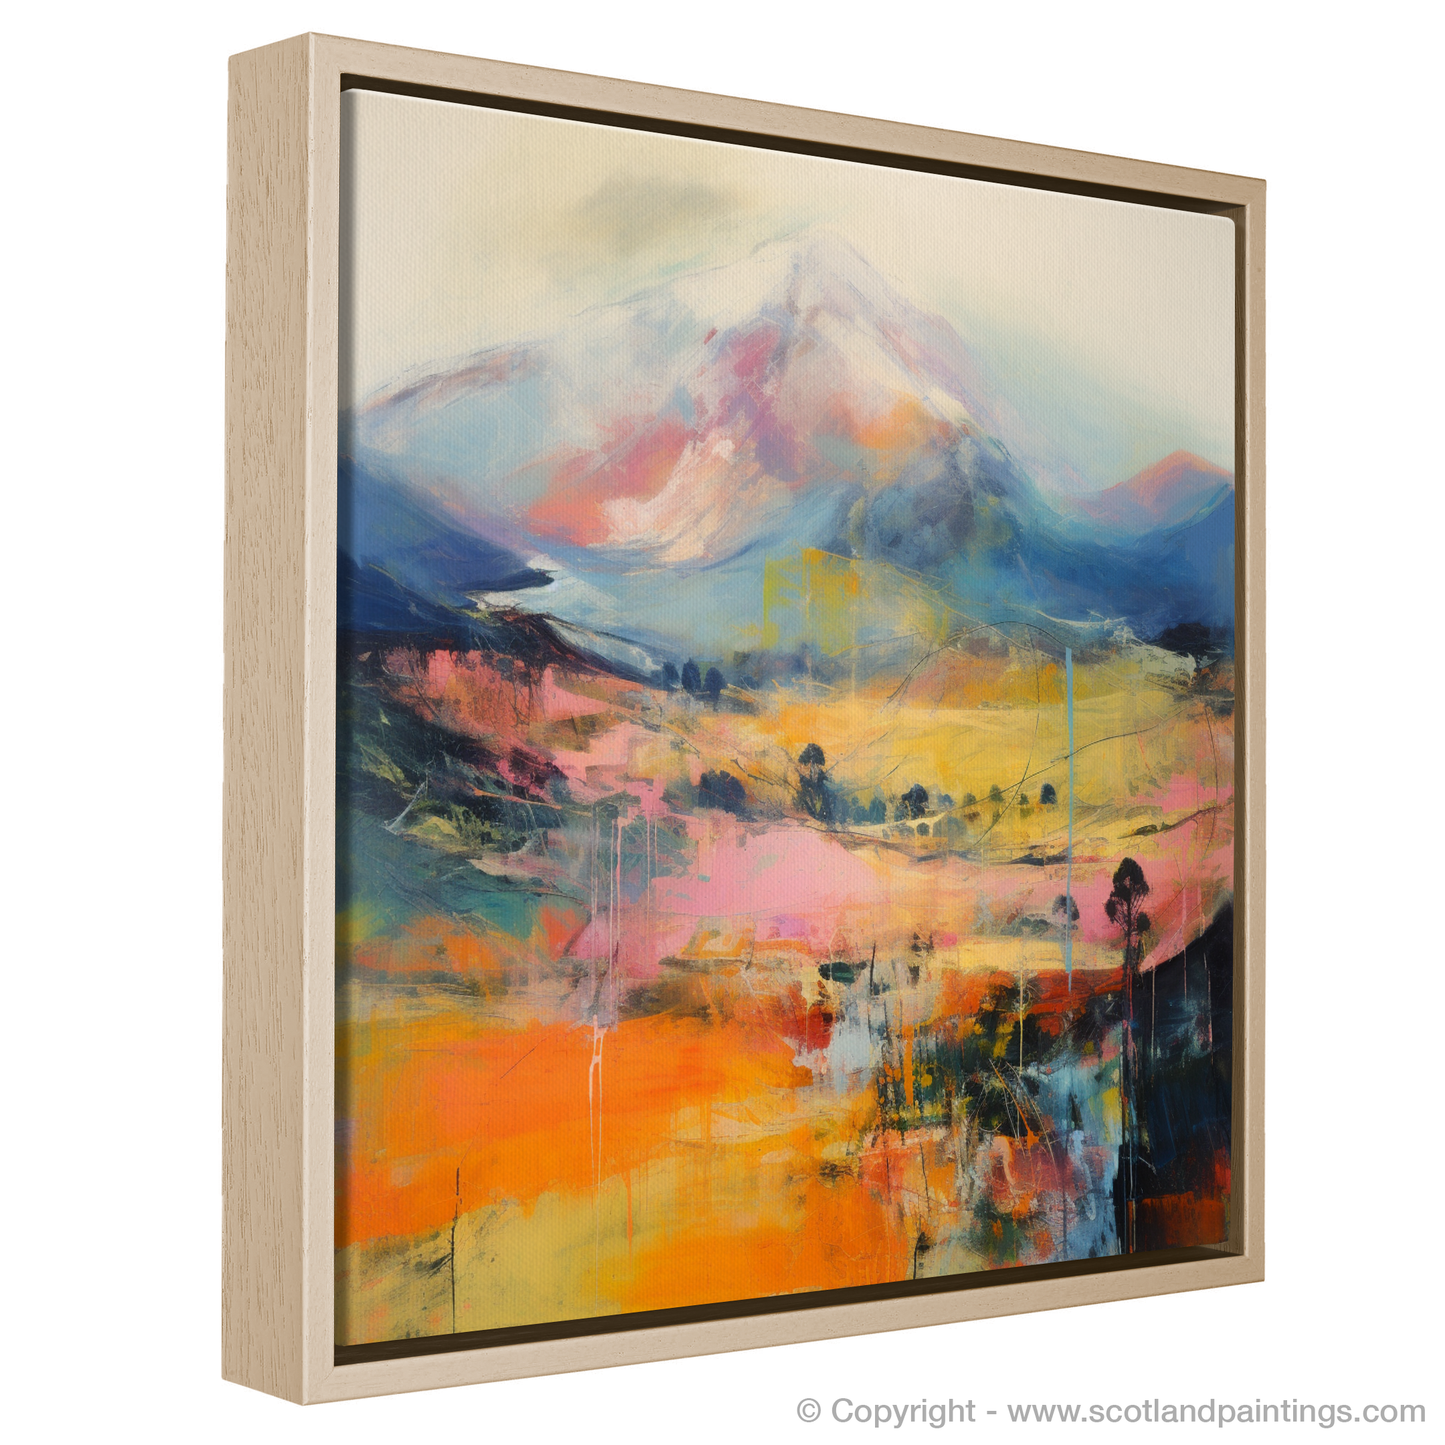 Painting and Art Print of Ben Lawers, Perth and Kinross entitled "Captivating Ben Lawers: An Abstract Expressionist Tribute to Scottish Highlands".